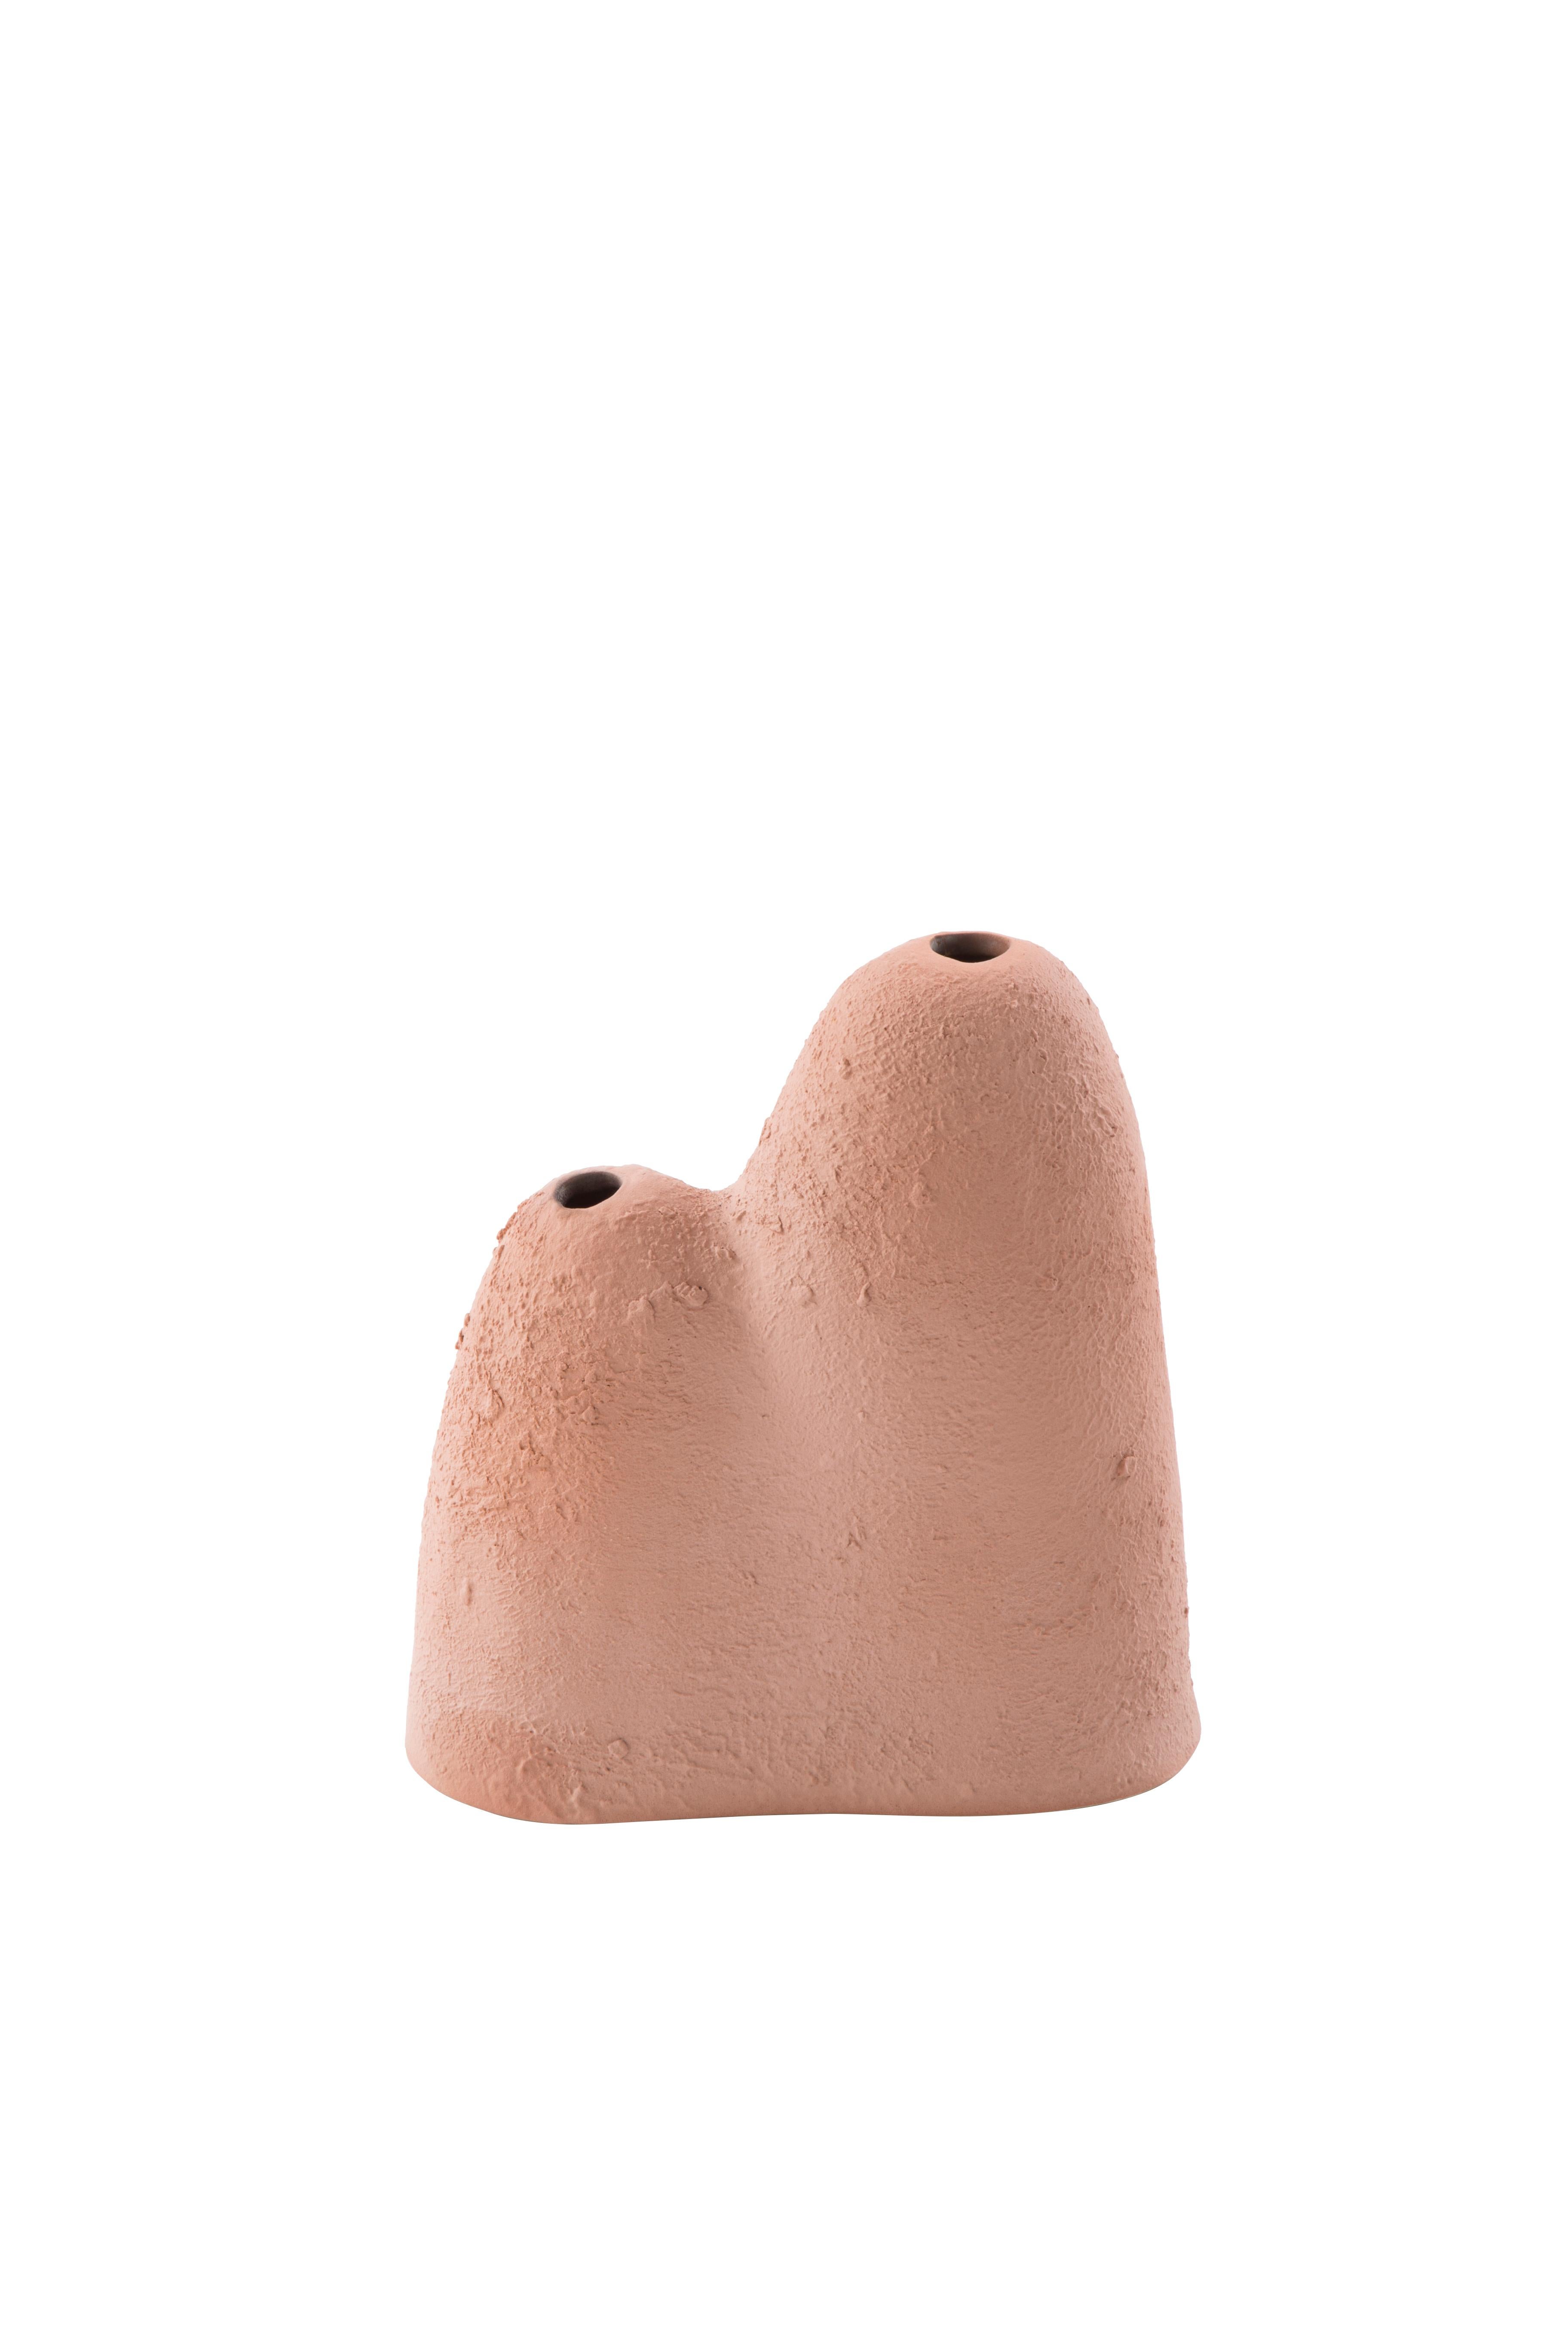 Mountain small terracotta vase by Pulpo
Dimensions: D 21 x W 9 x H 22 cm
Materials: ceramic

Also available in different colours.

Making a dramatic entrance overtop your tablescape below comes the mountain vase. Its solid ceramic form